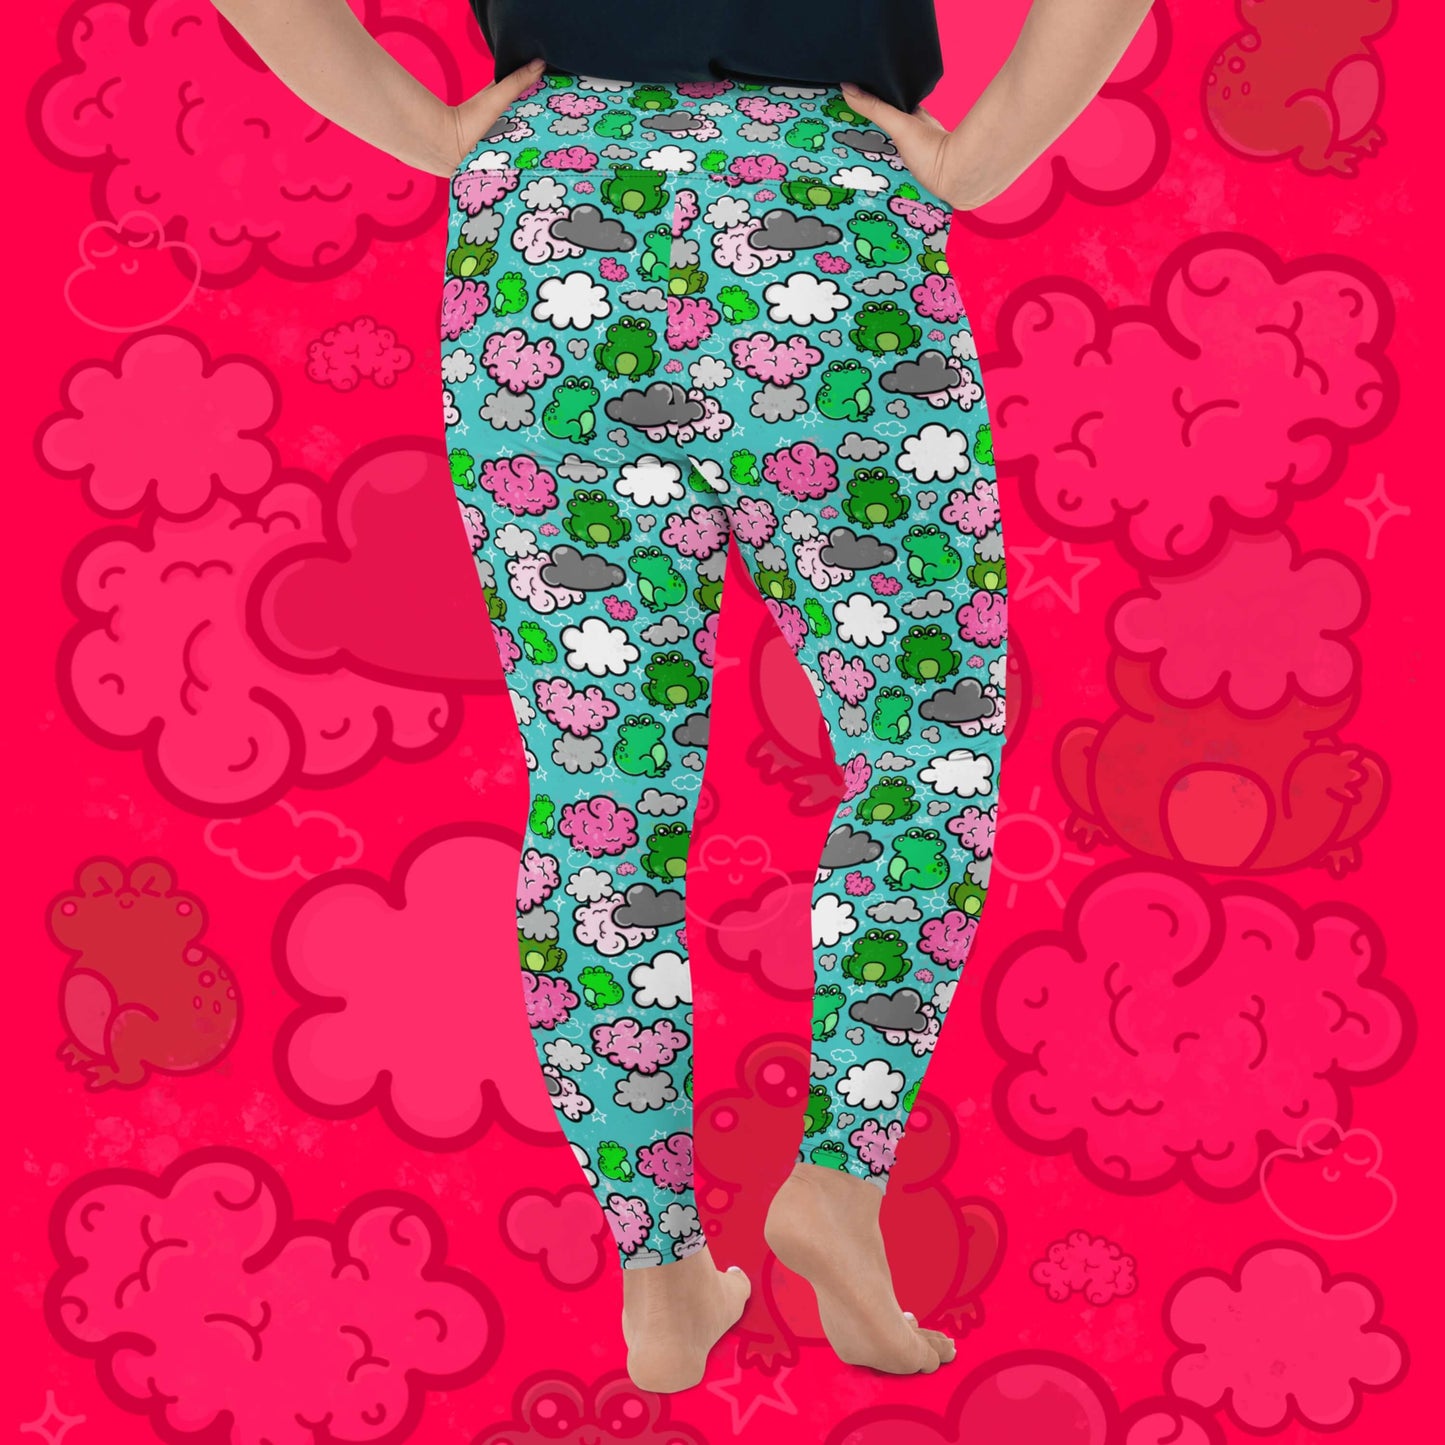 The Brain Frog Plus Size Leggings - Brain Fog being worn by a model facing away with their right leg bent on a red background with a faded brain frog print, the photo is cropped from the hips down. The leggings are an aqua blue base with various green kawaii face frogs with pink blush cheeks, pink brain style clouds, white and grey clouds and white sparkles all over. The design was created to raise awareness of Brain Fog.